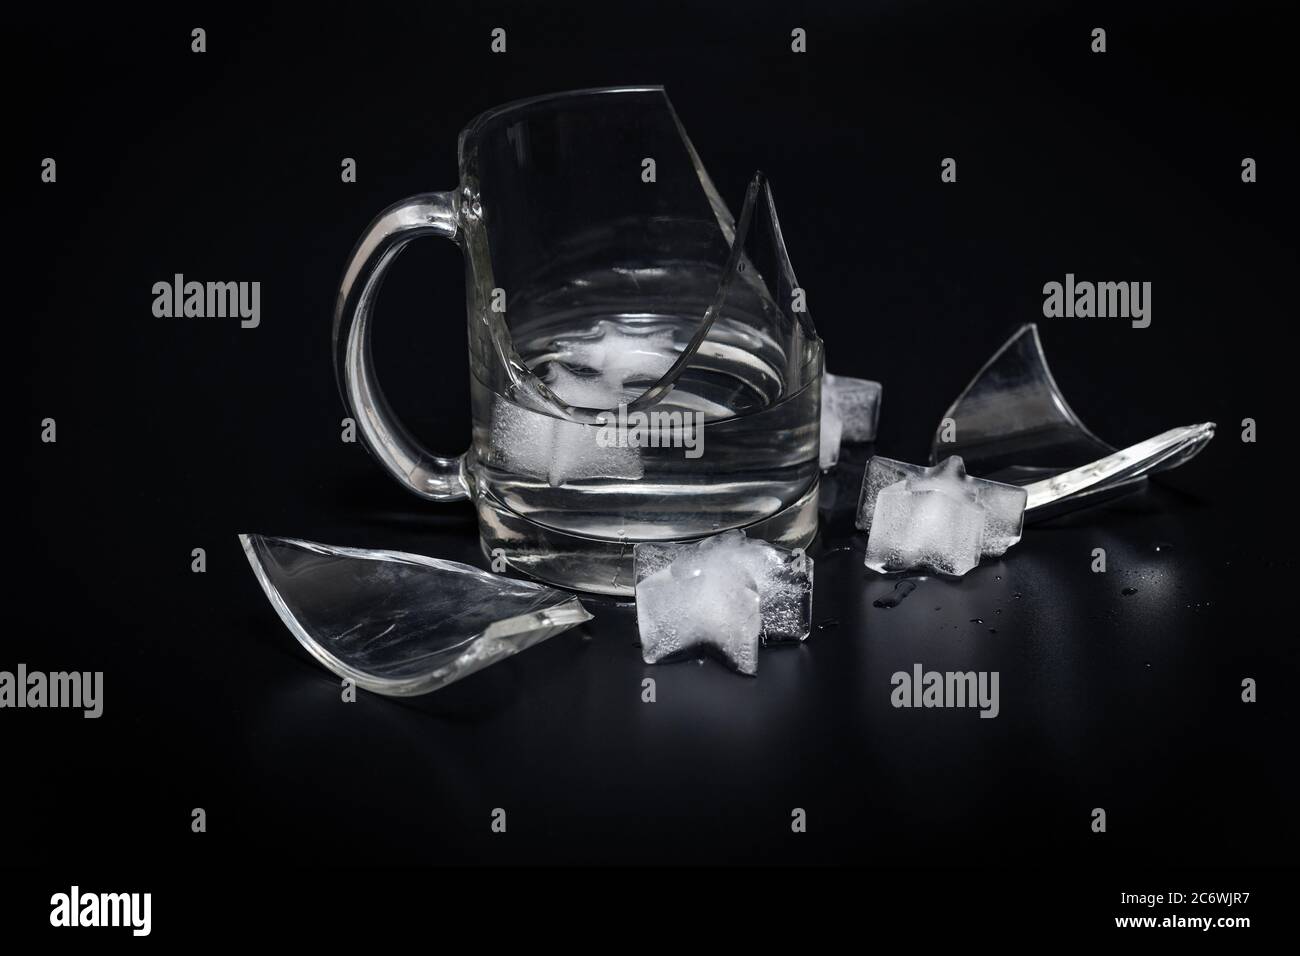 https://c8.alamy.com/comp/2C6WJR7/broken-glass-cup-with-splinters-water-and-ice-on-a-black-background-2C6WJR7.jpg